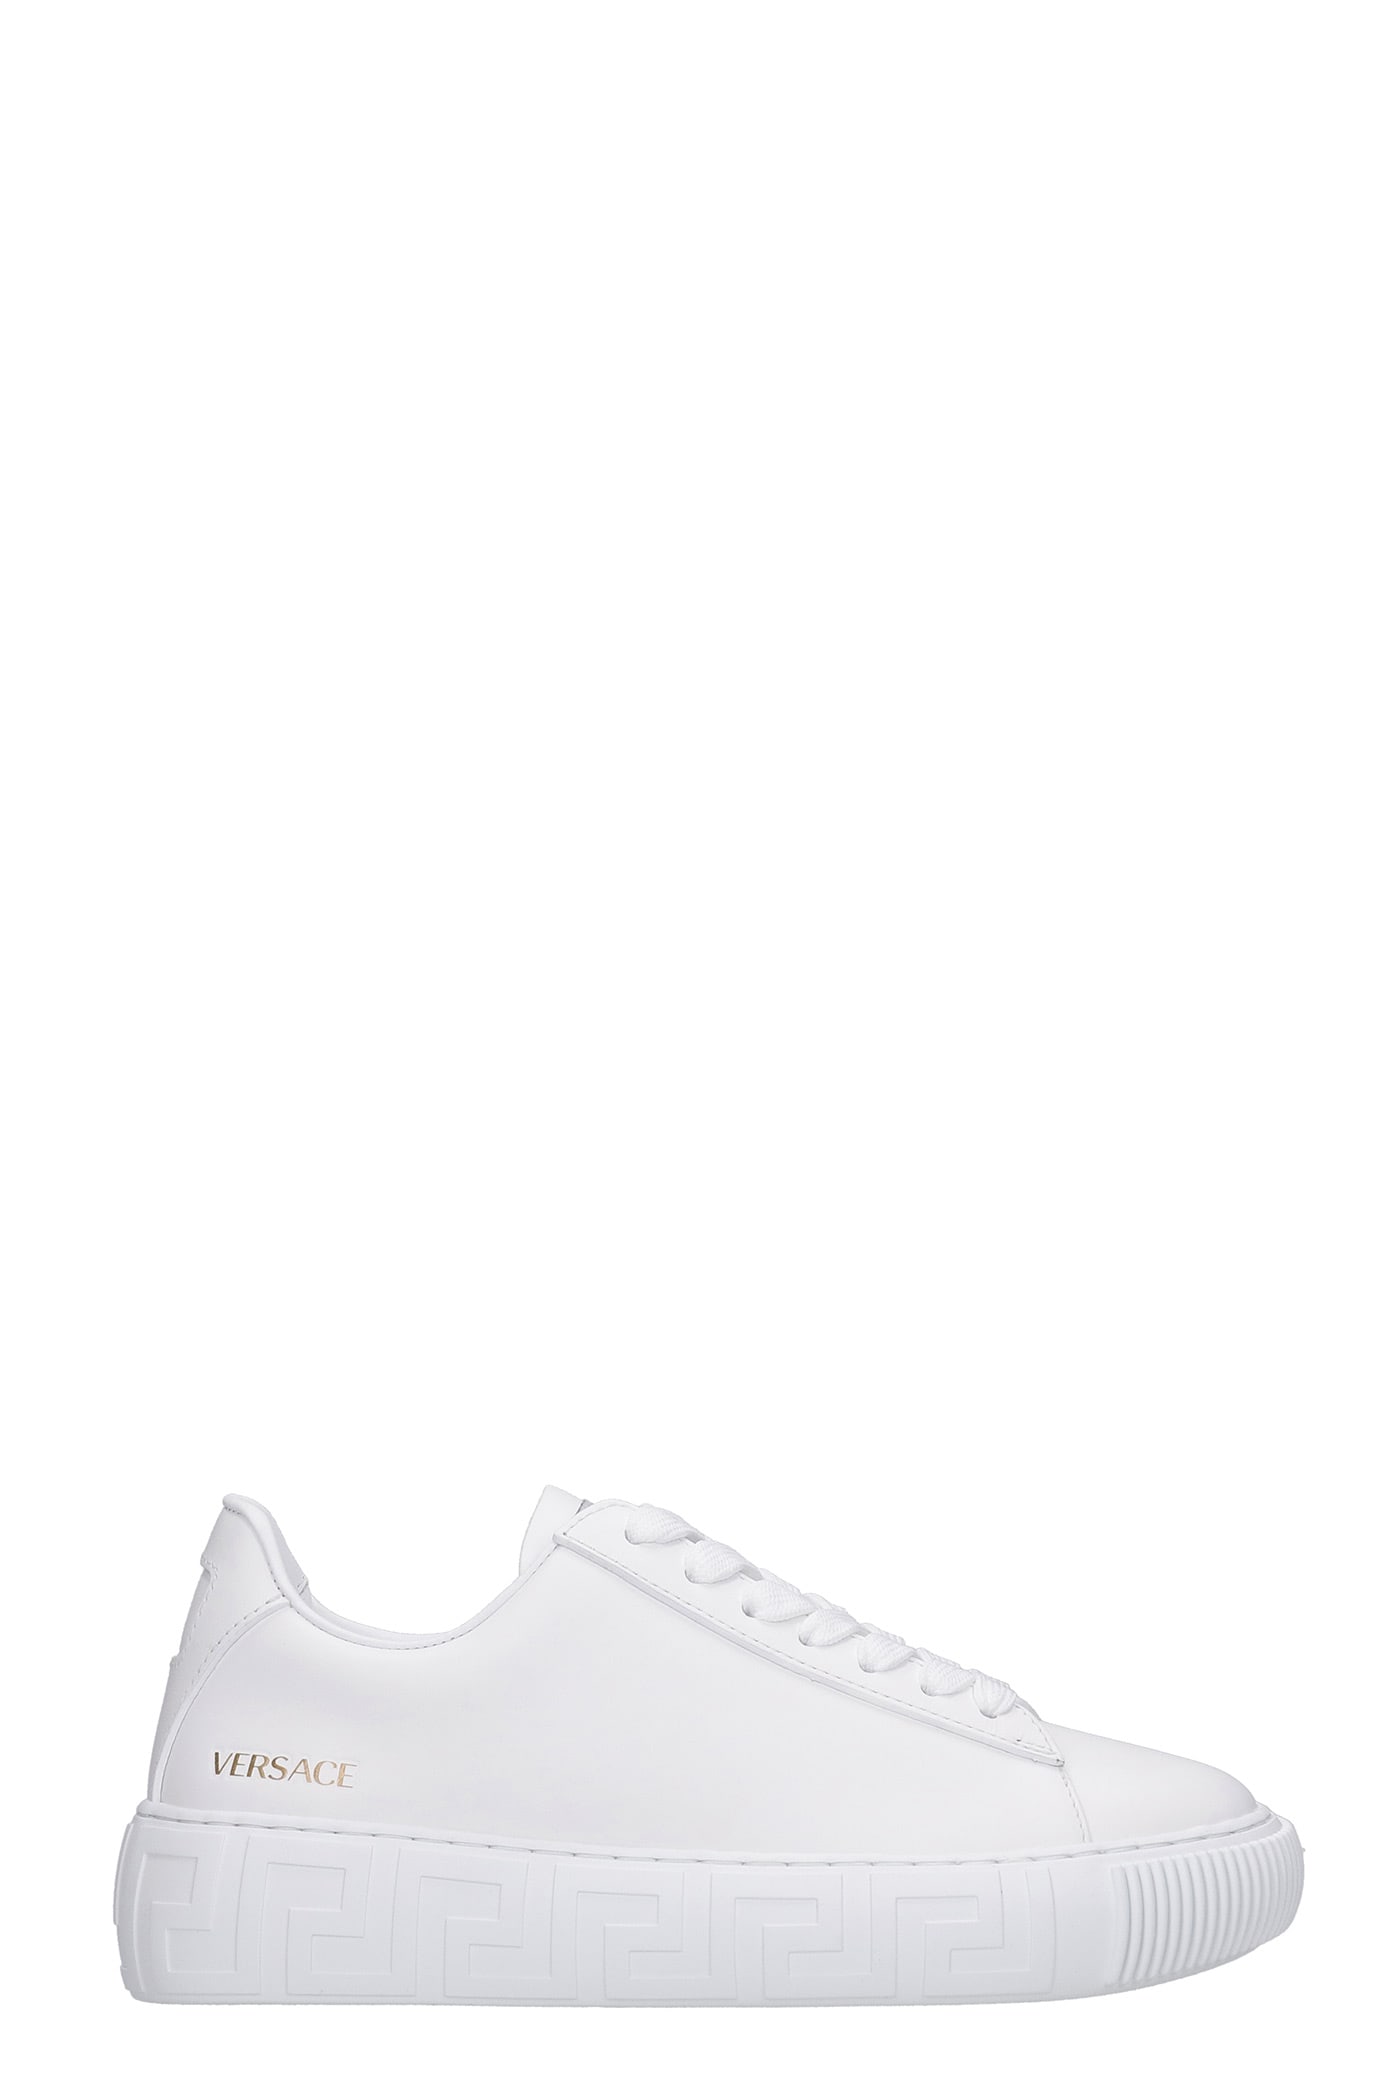 Versace Greca Sneakers In White Leather